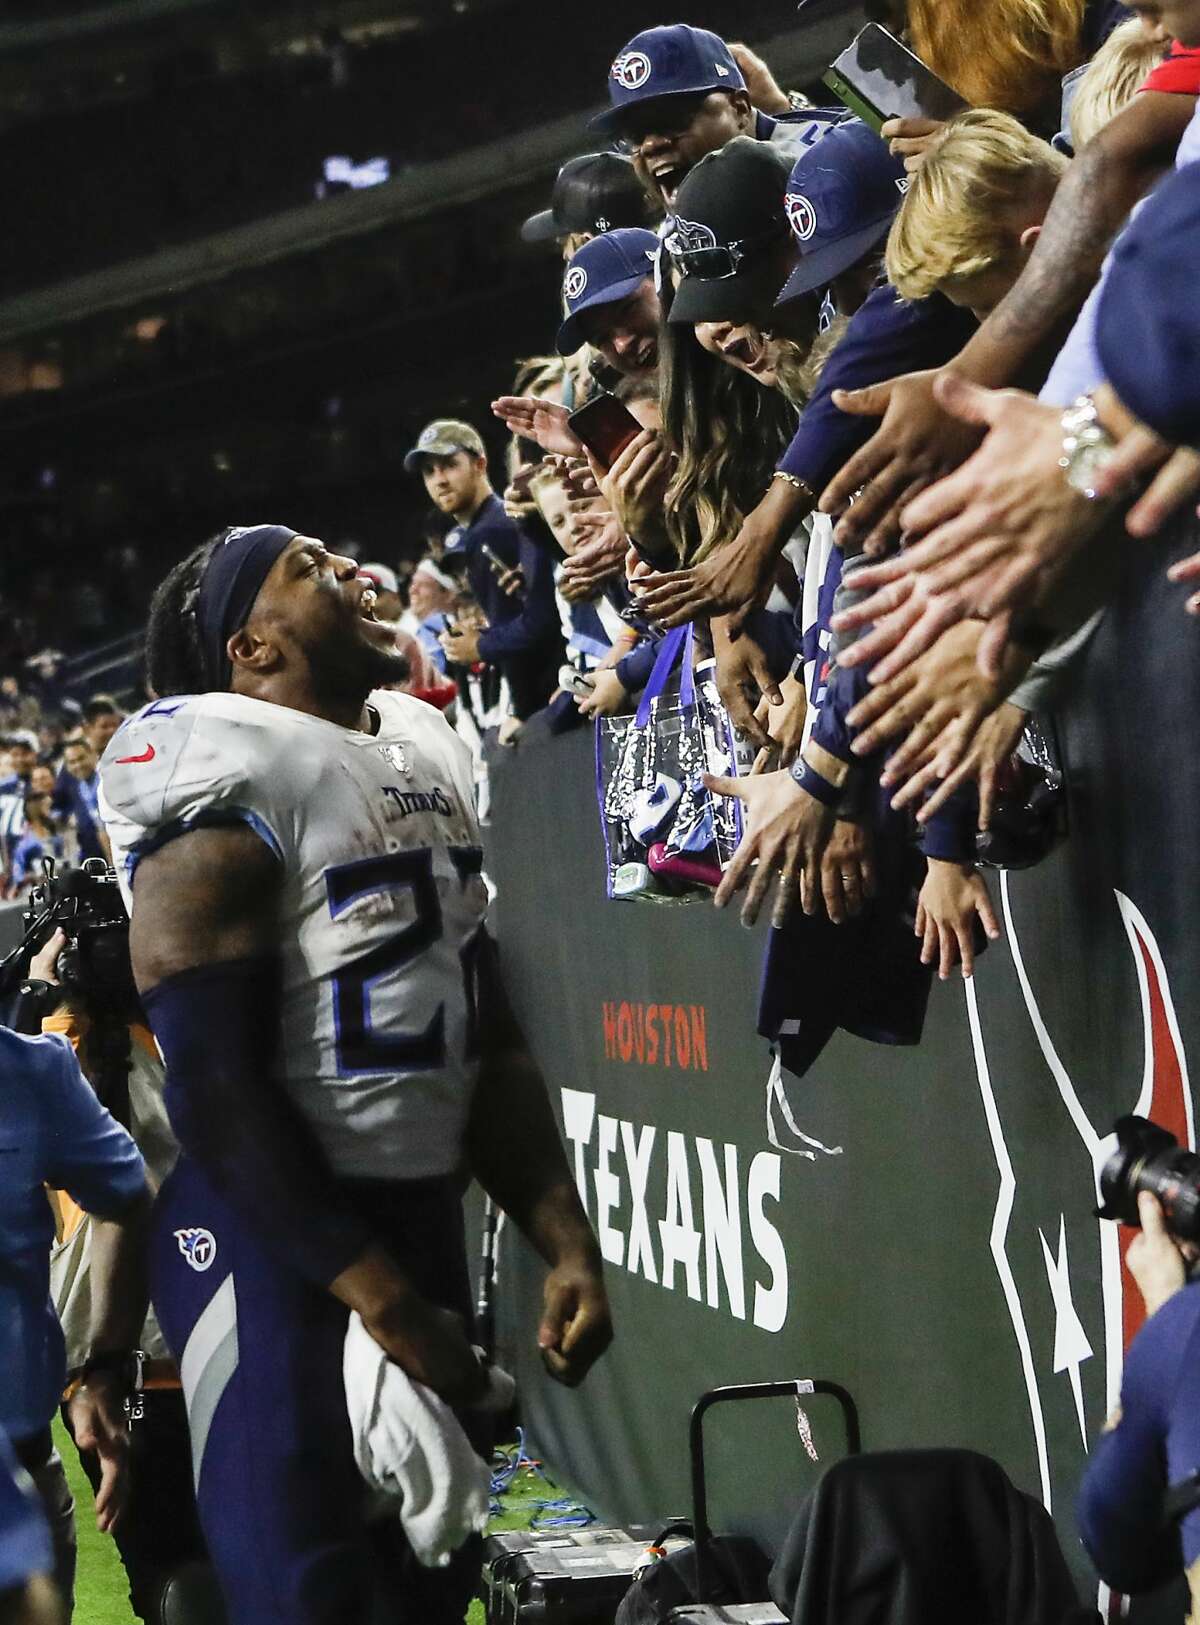 Tennessee Titans running back Derrick Henry (22) celebrates with Titans fans after beating the Houston Texans 35-14 in an NFL football game at NRG Stadium on Sunday, Dec. 29, 2019, in Houston.